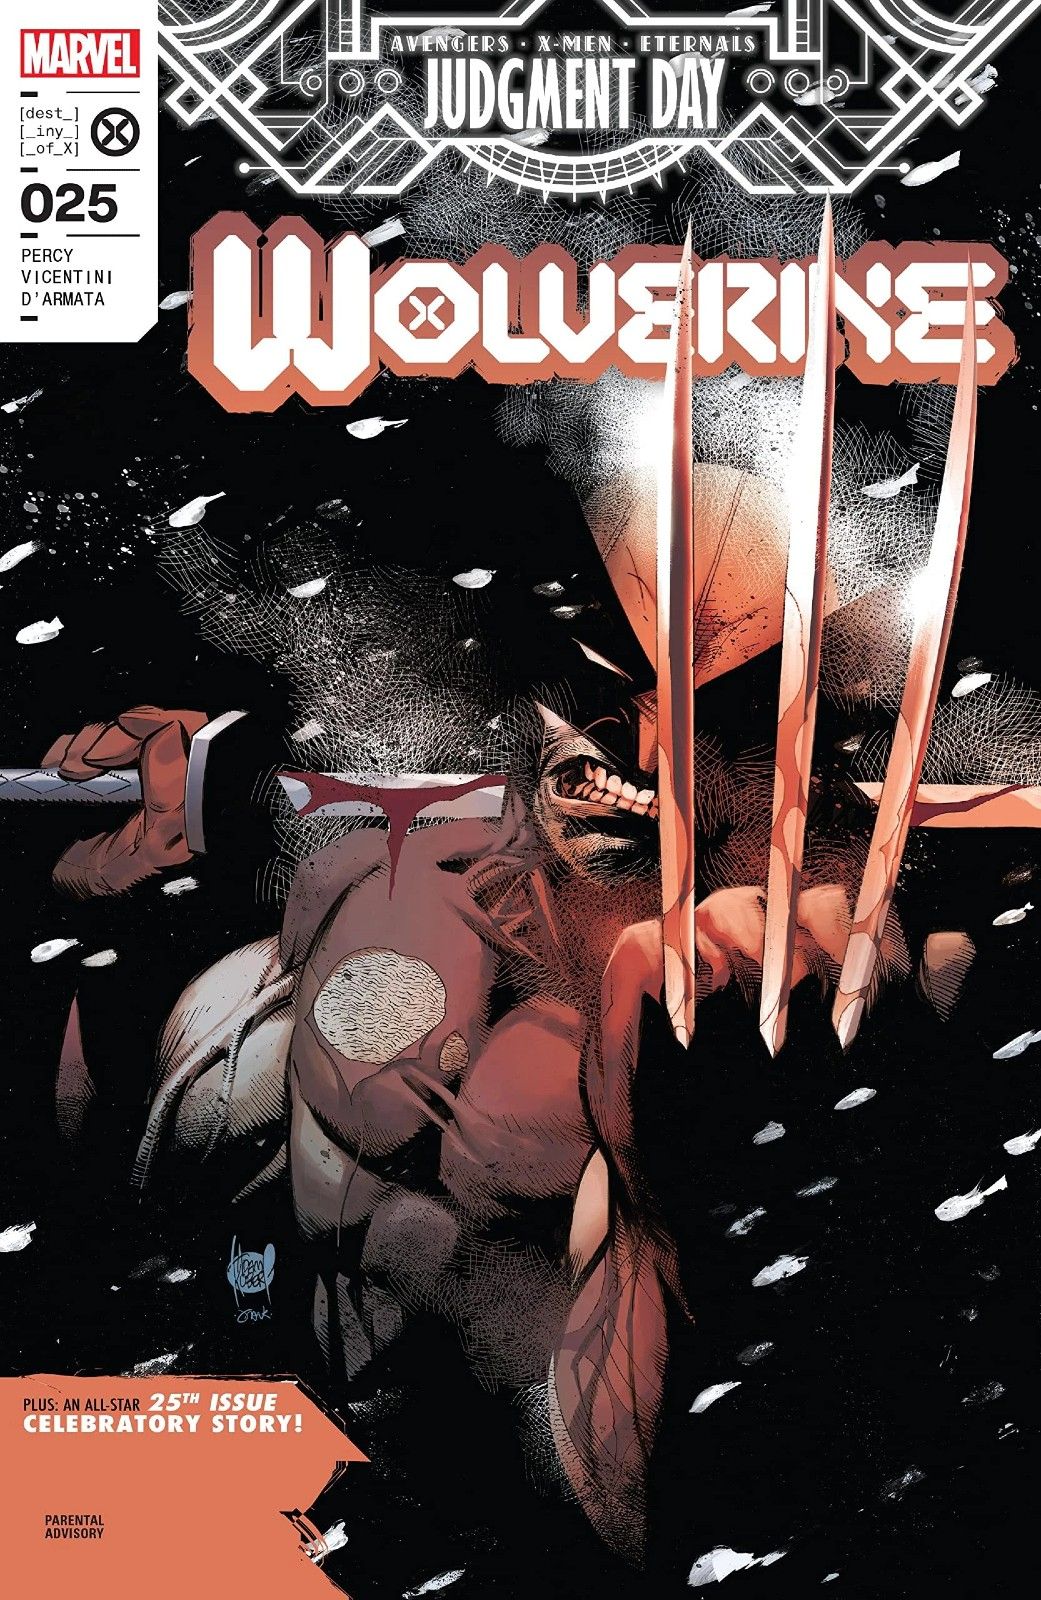 Wolverine extending his claws with a fierce snarl in Wolverine (Vol. 7) #25 by Marvel